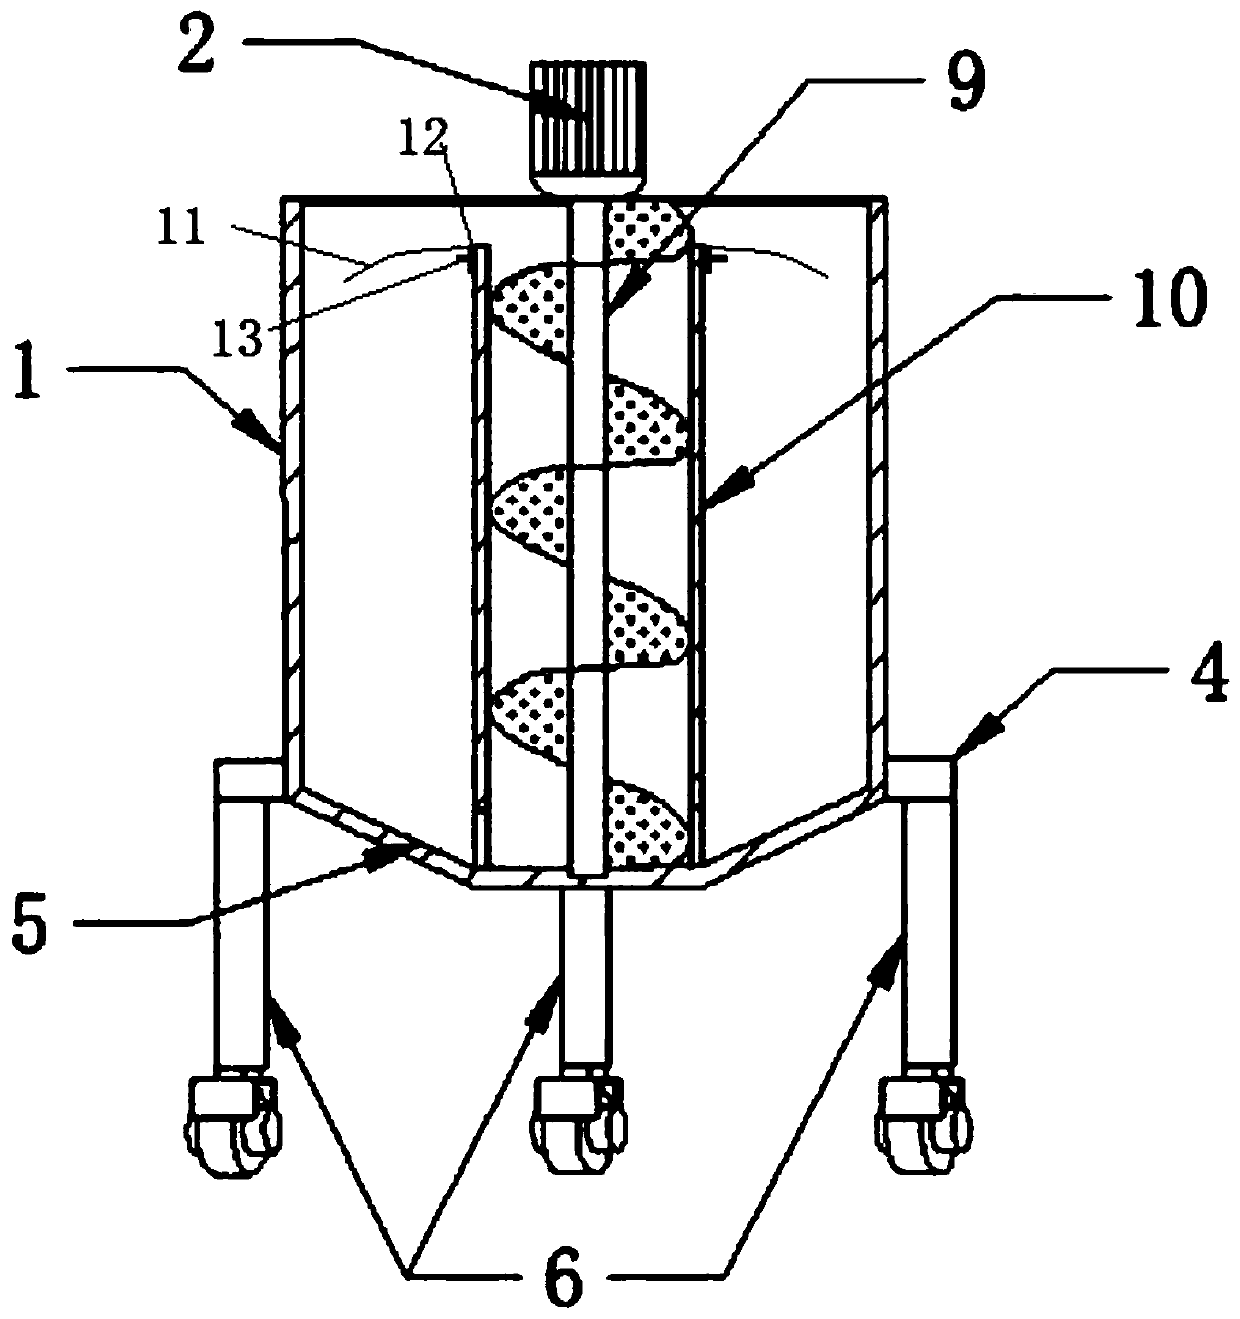 Improved material mixing device